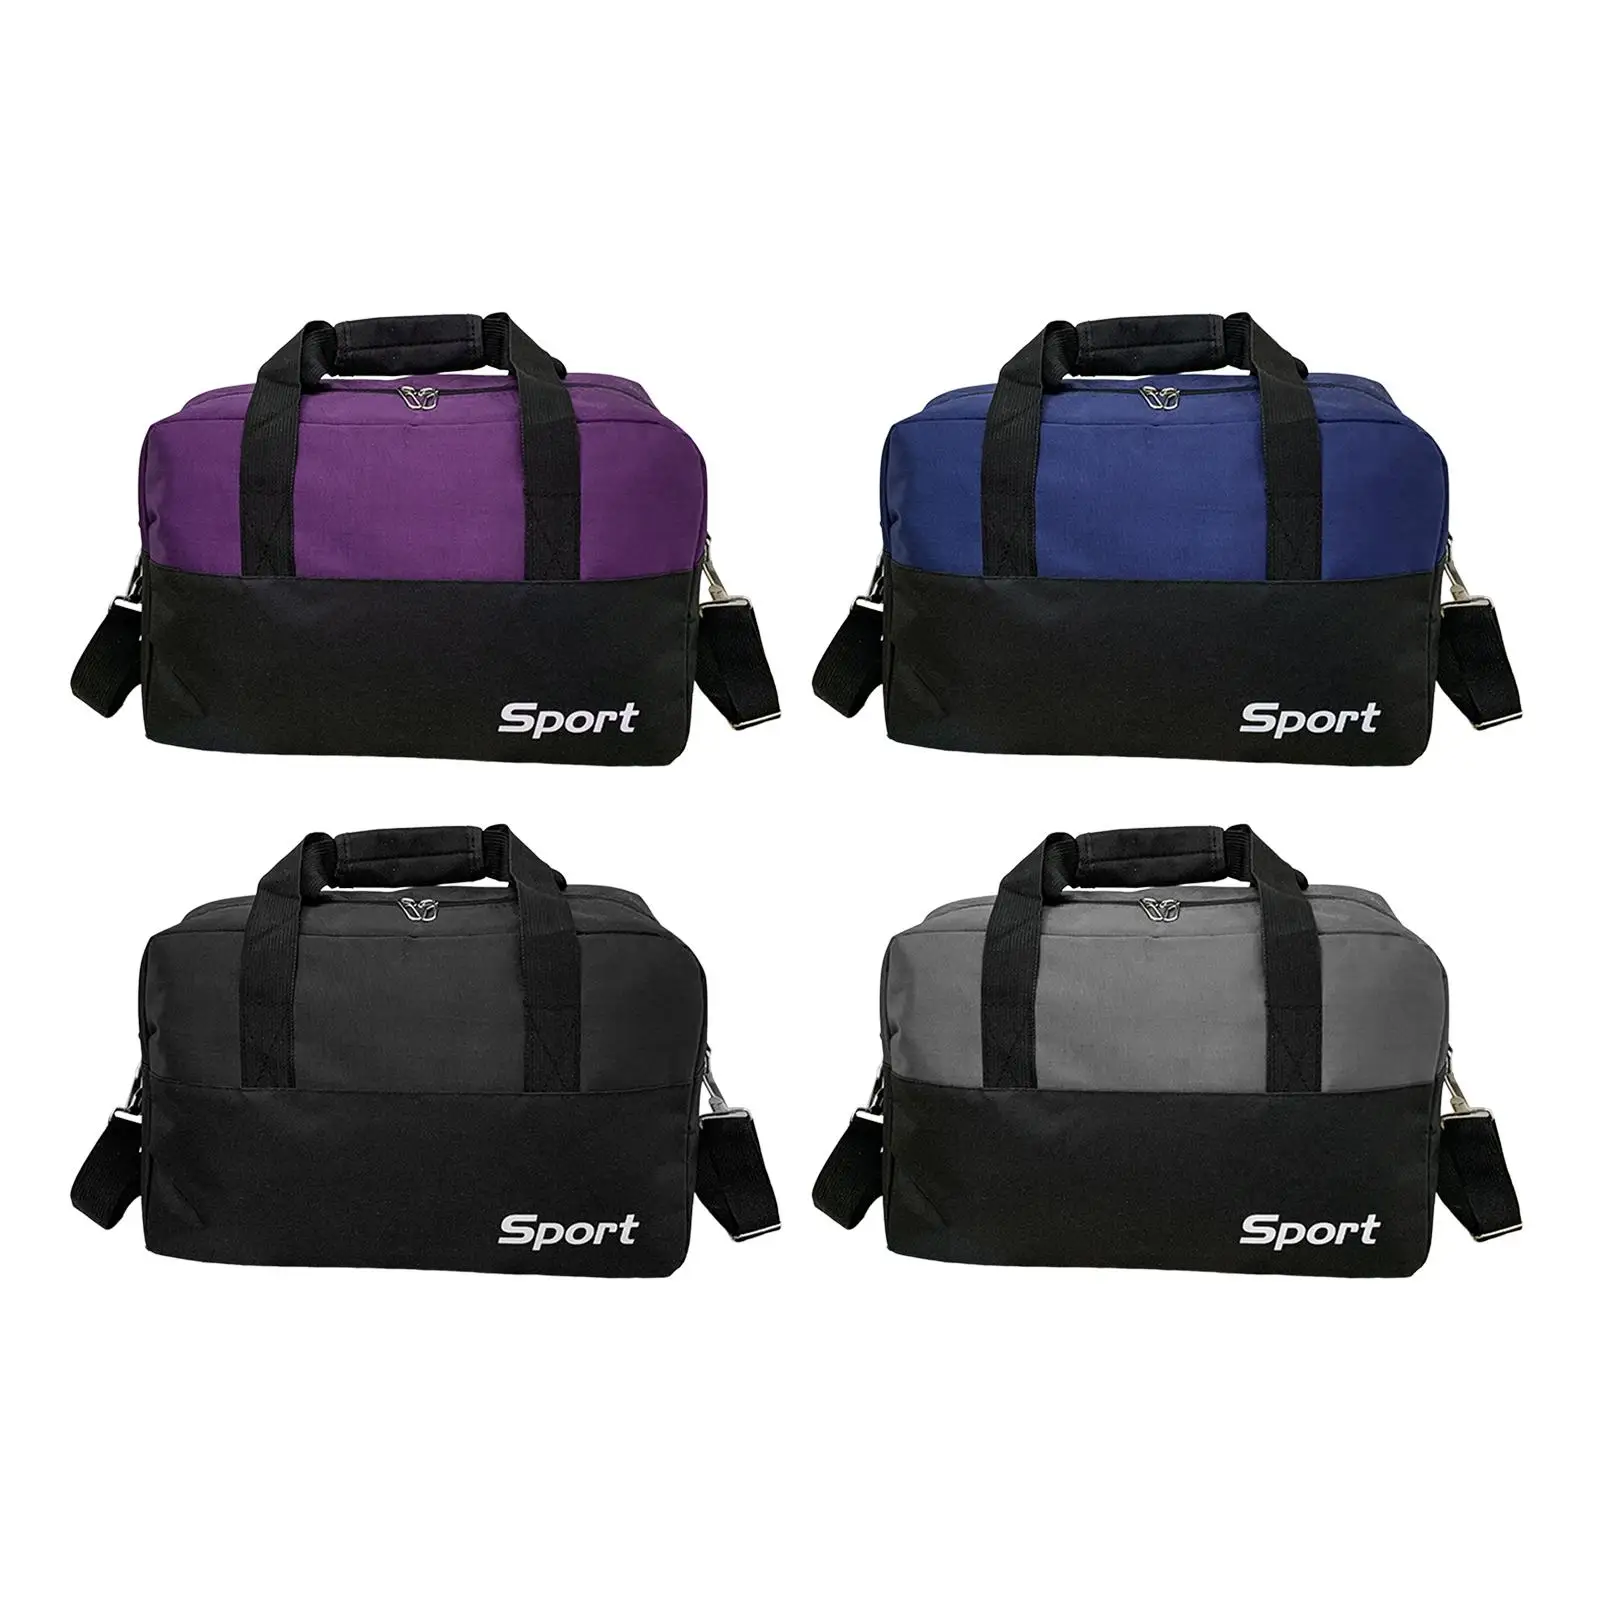 Gym Bag for Women and Men, Small Duffel Bag for Sports, Gyms and Weekend Getaway, Dufflebag, Lightweight Carryon Gymbag